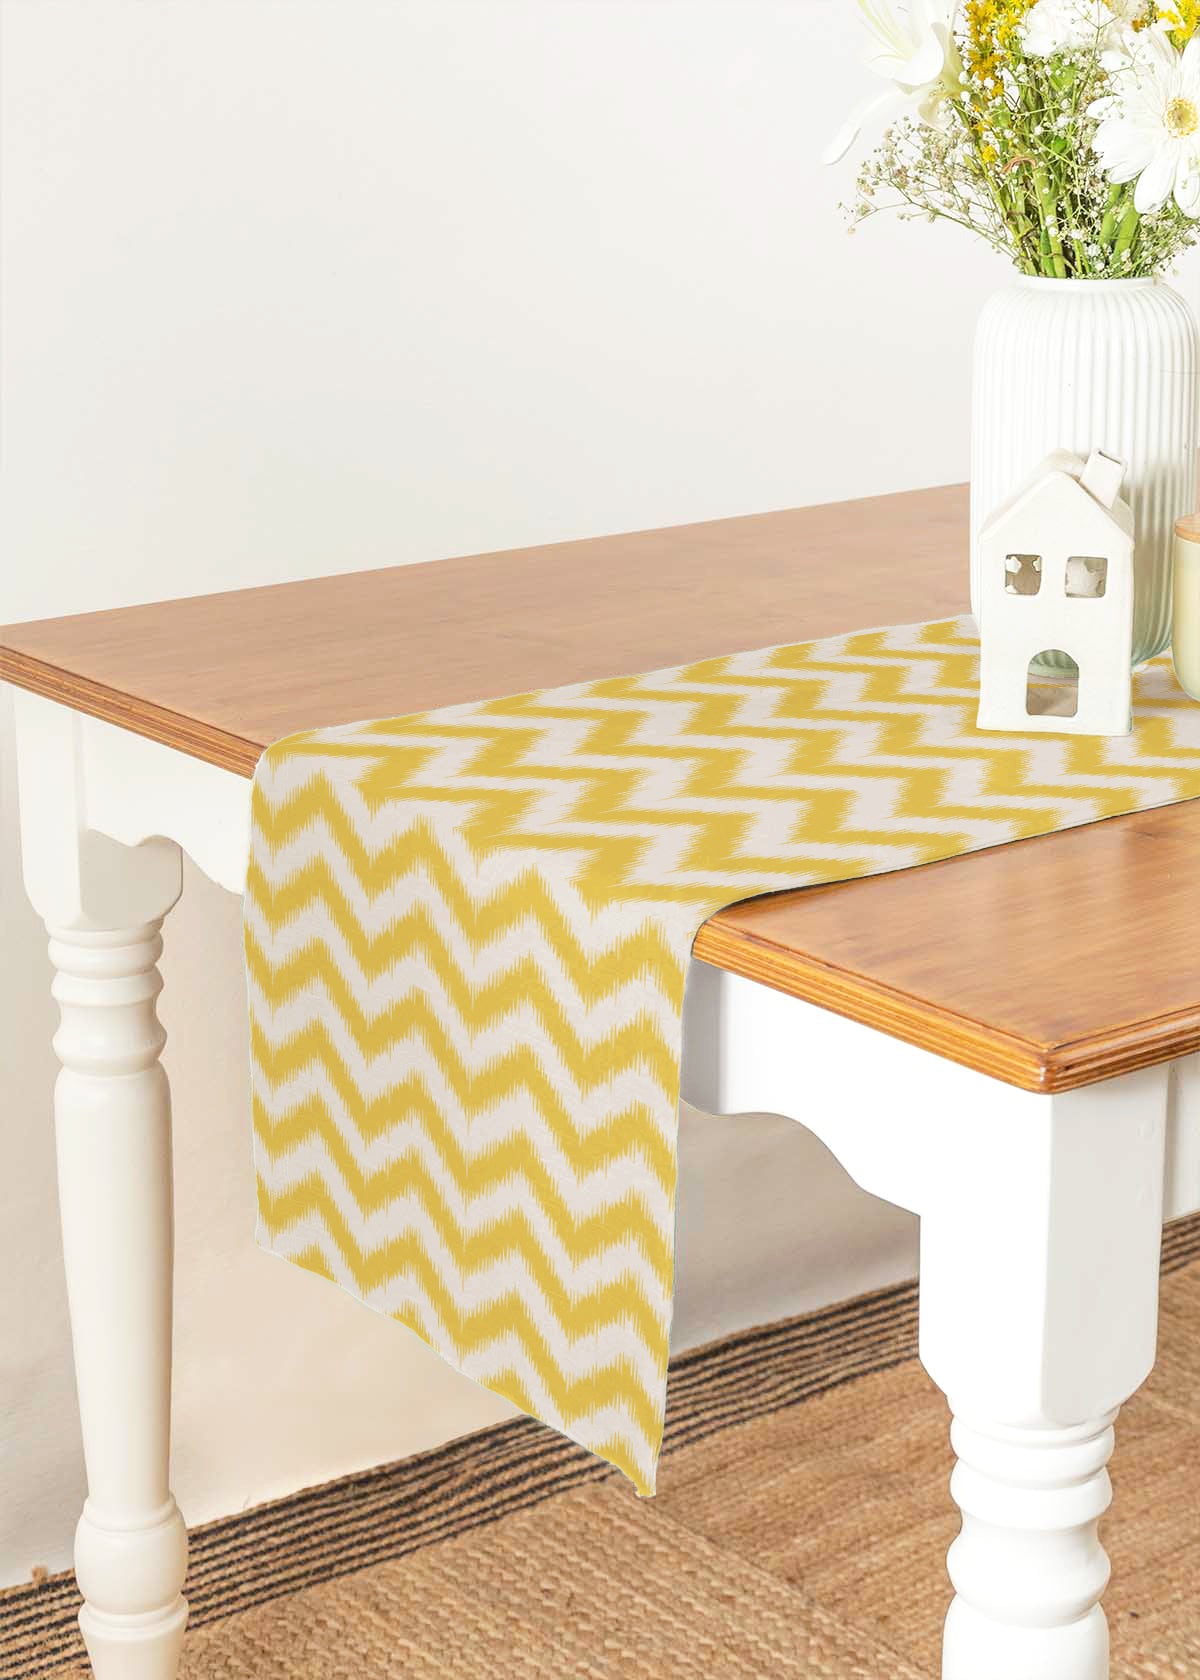 Ikat 100% cotton customisable geometric table Runner for dining - Yellow